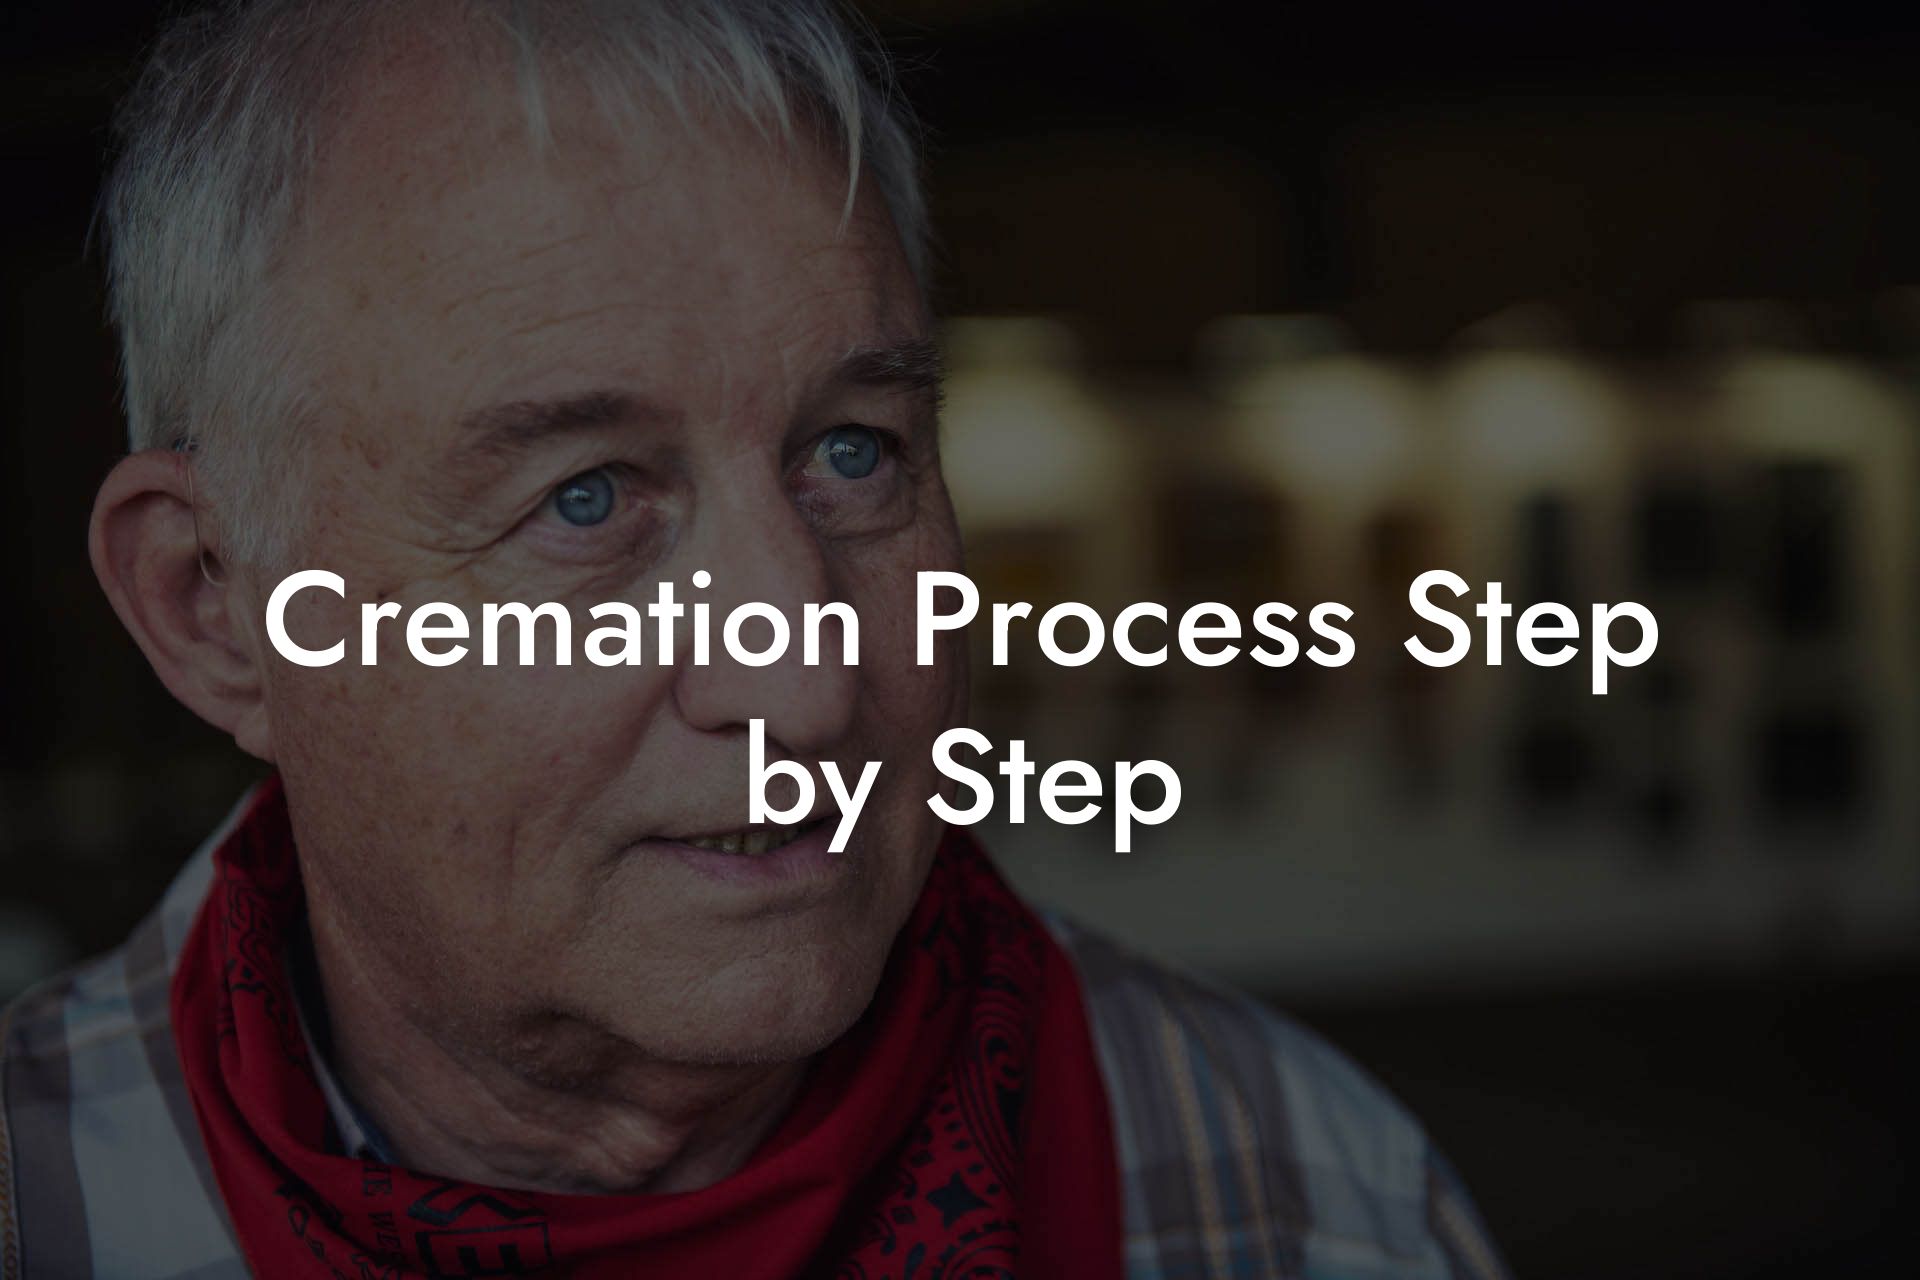 Cremation Process Step by Step